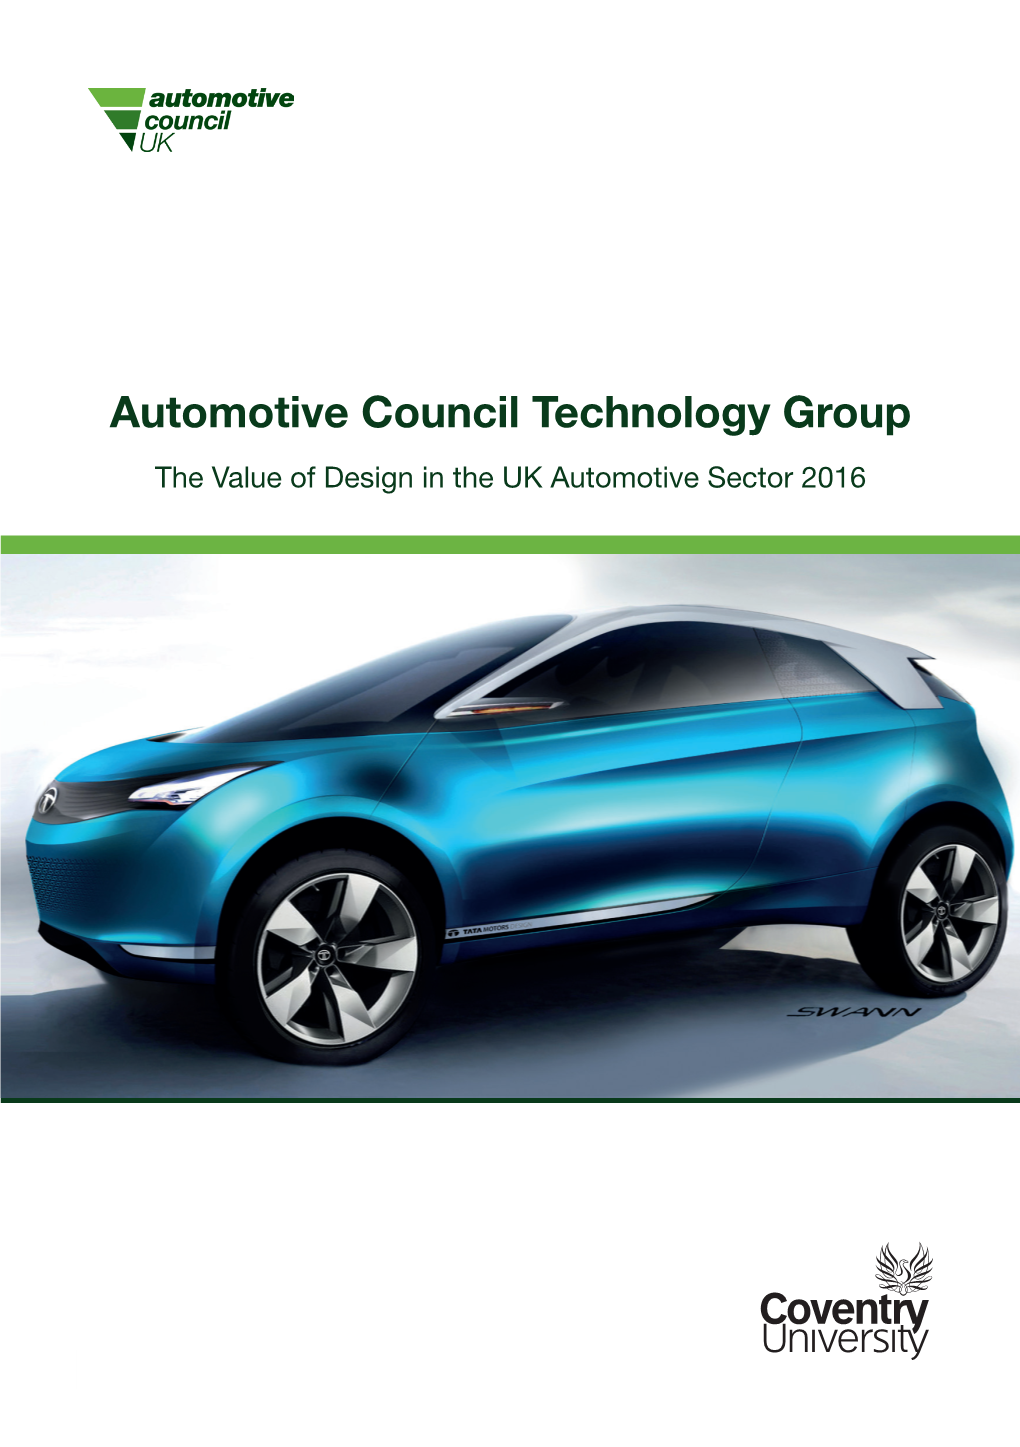 Automotive Council Technology Group the Value of Design in the UK Automotive Sector 2016